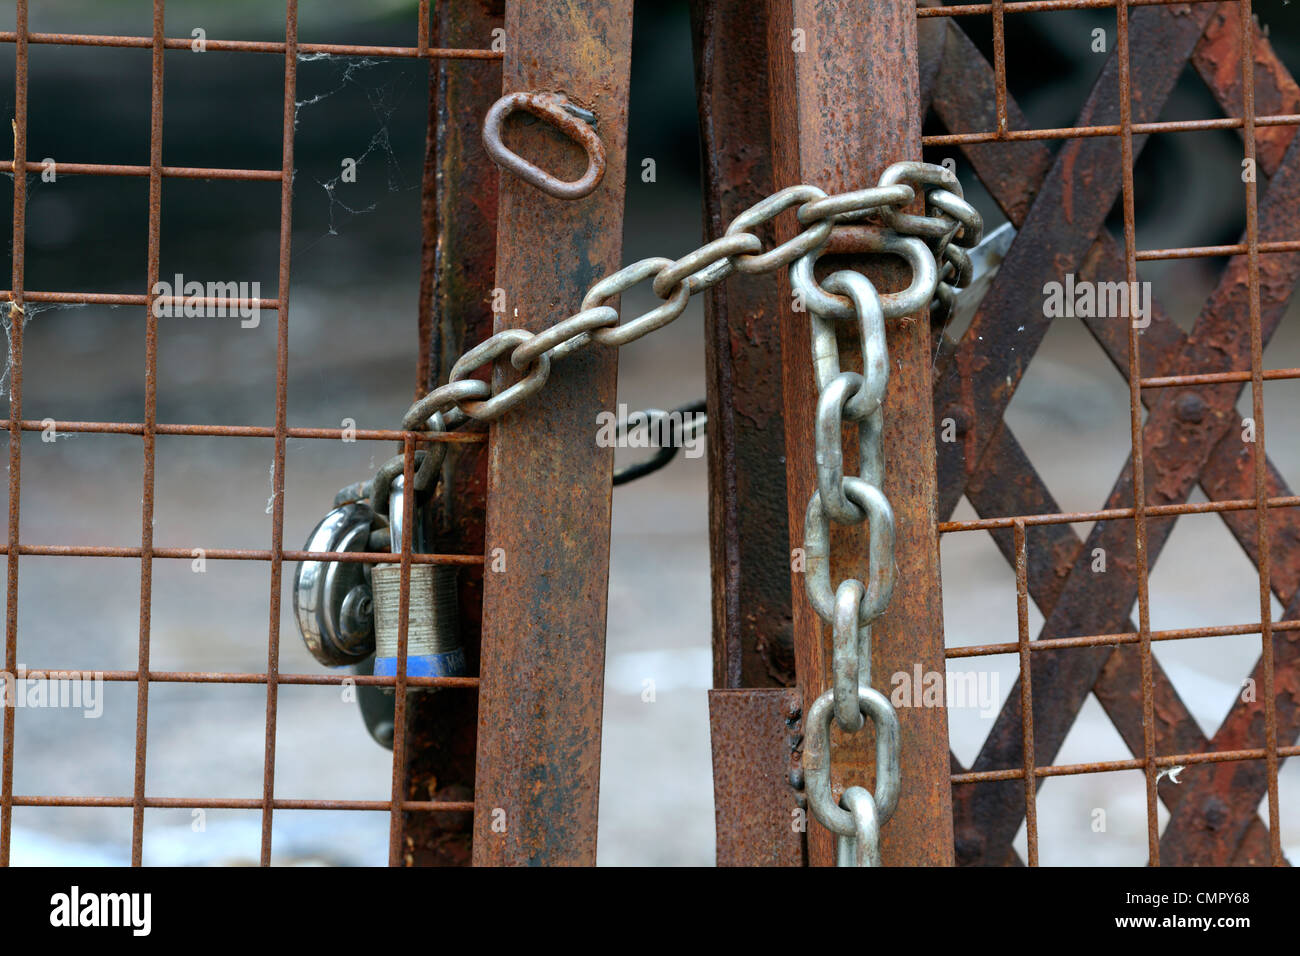 padlocks secure gates at a closed industrial site, Bristol. Stock Photo